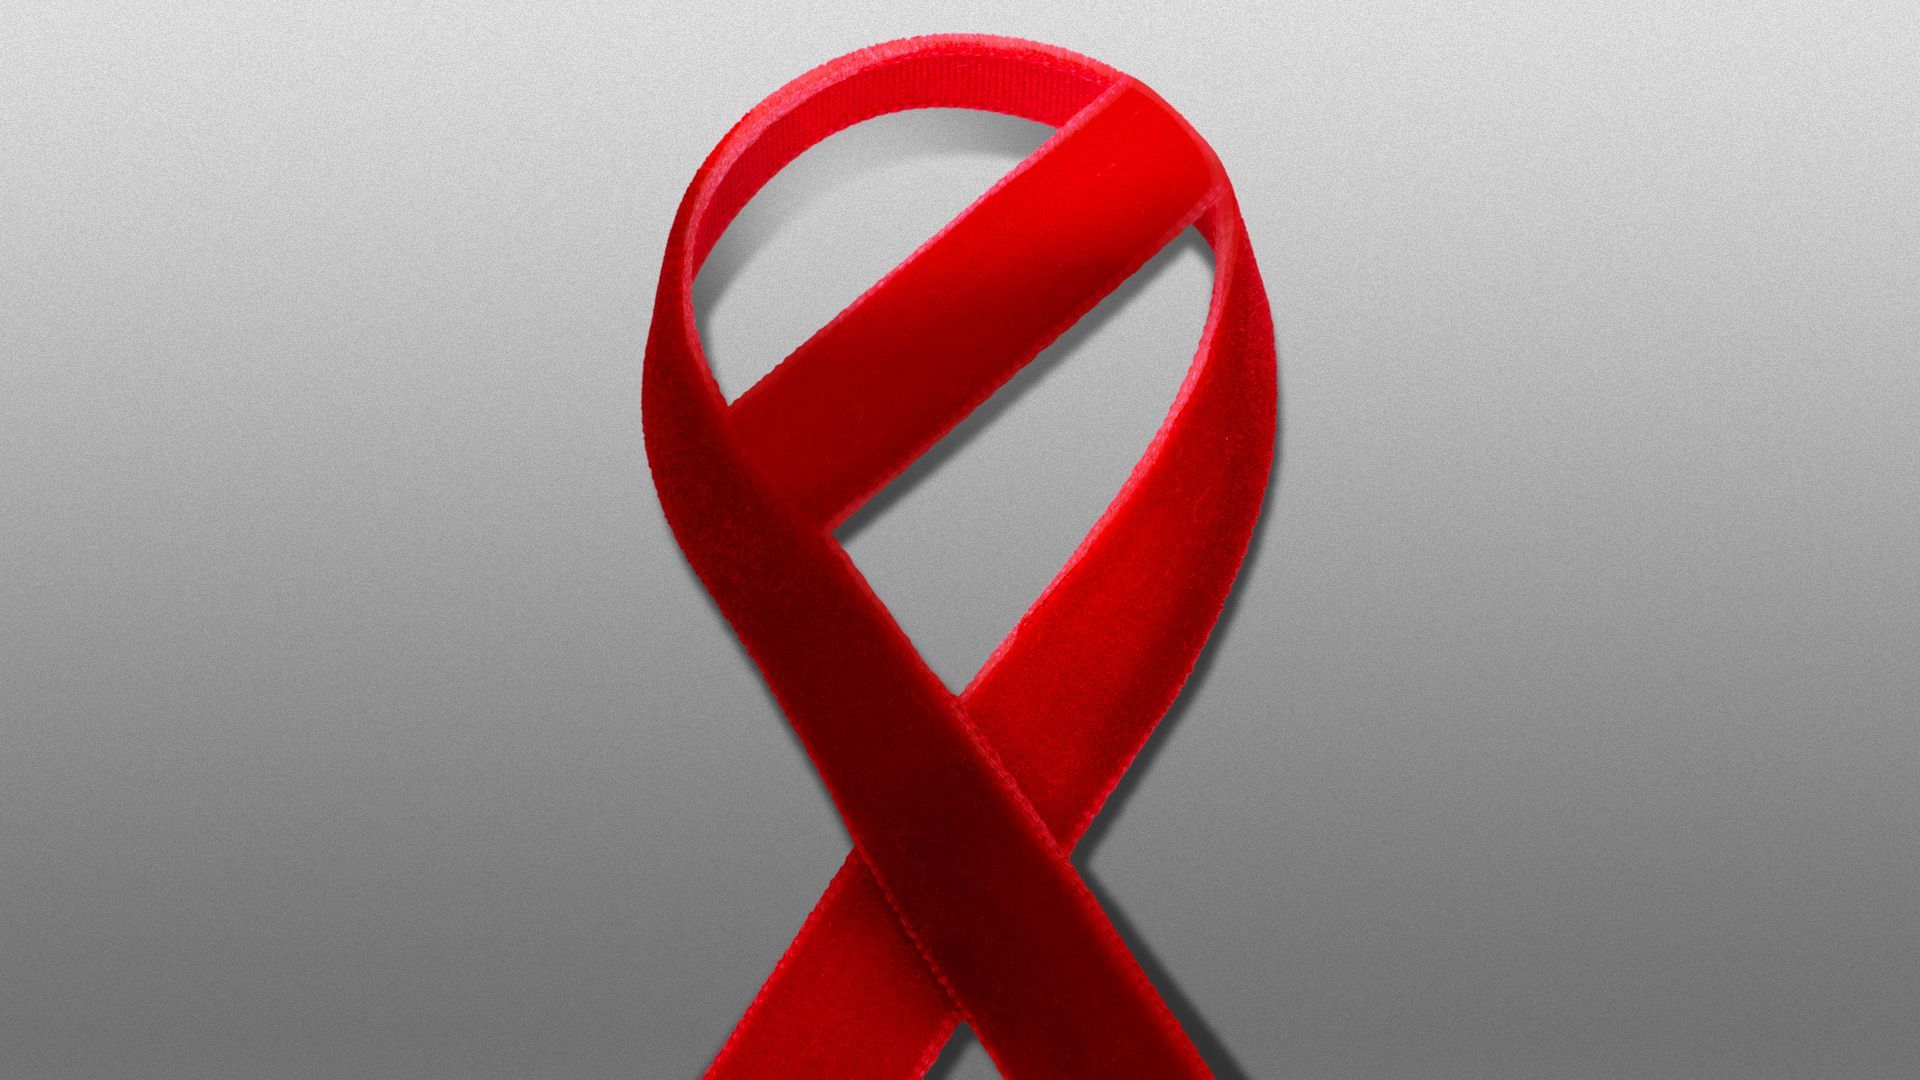 Illustration of a red AIDS awareness ribbon shaped like a 